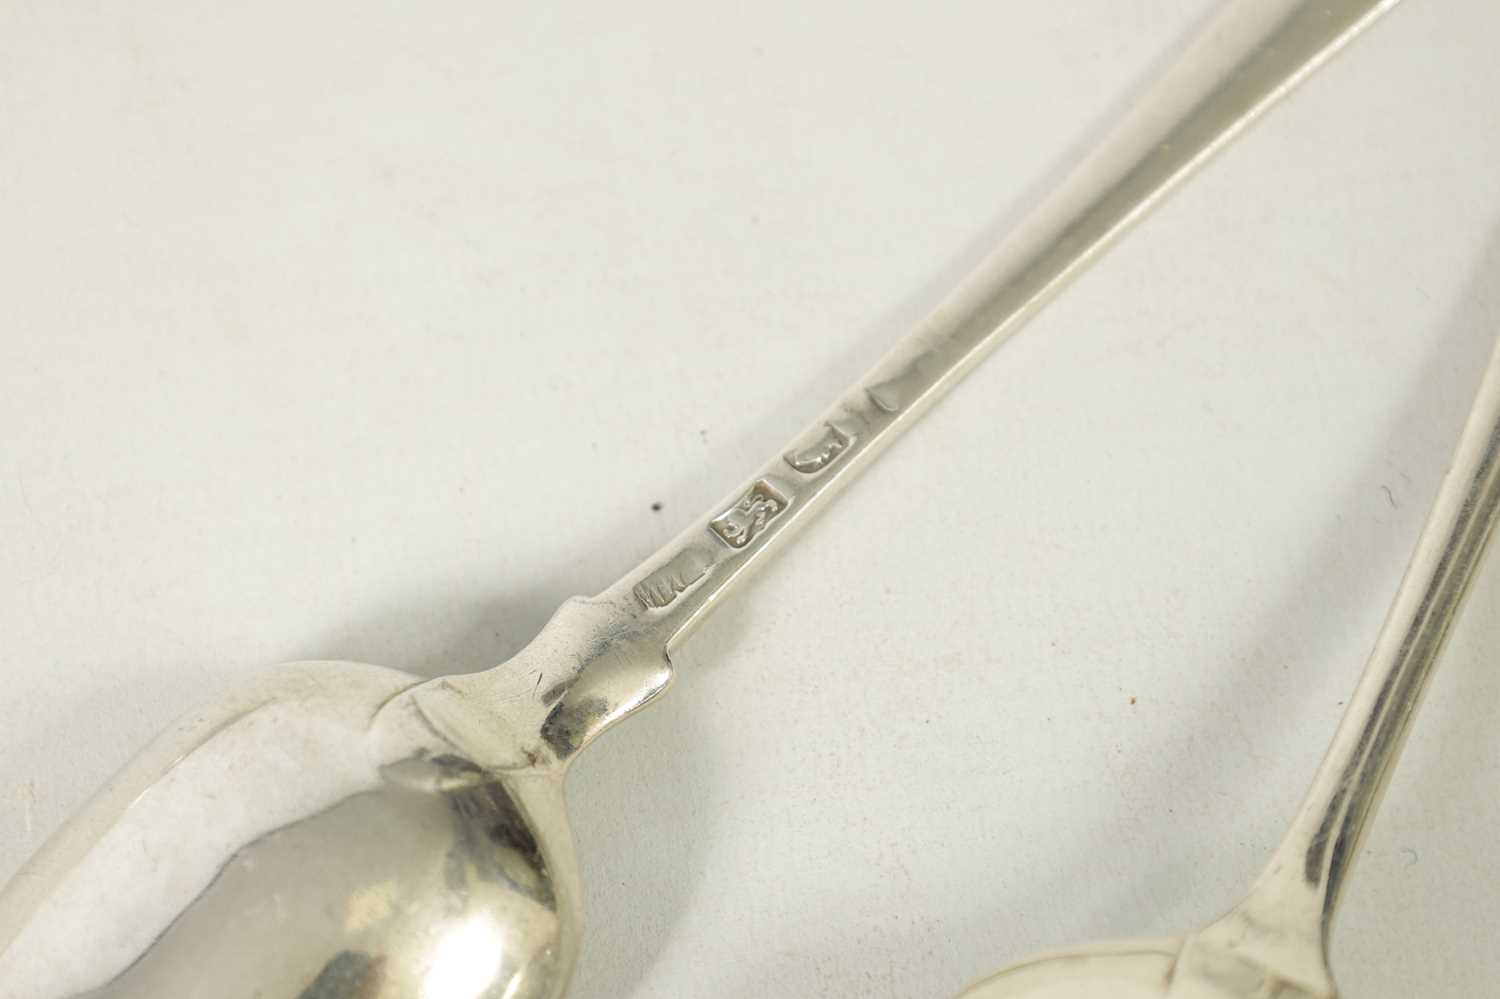 A MATCHED SET OF 11 GEORGE III OLD ENGLISH AND FIDDLE PATTERN SILVER SERVING/SOUP SPOONS - Image 7 of 7